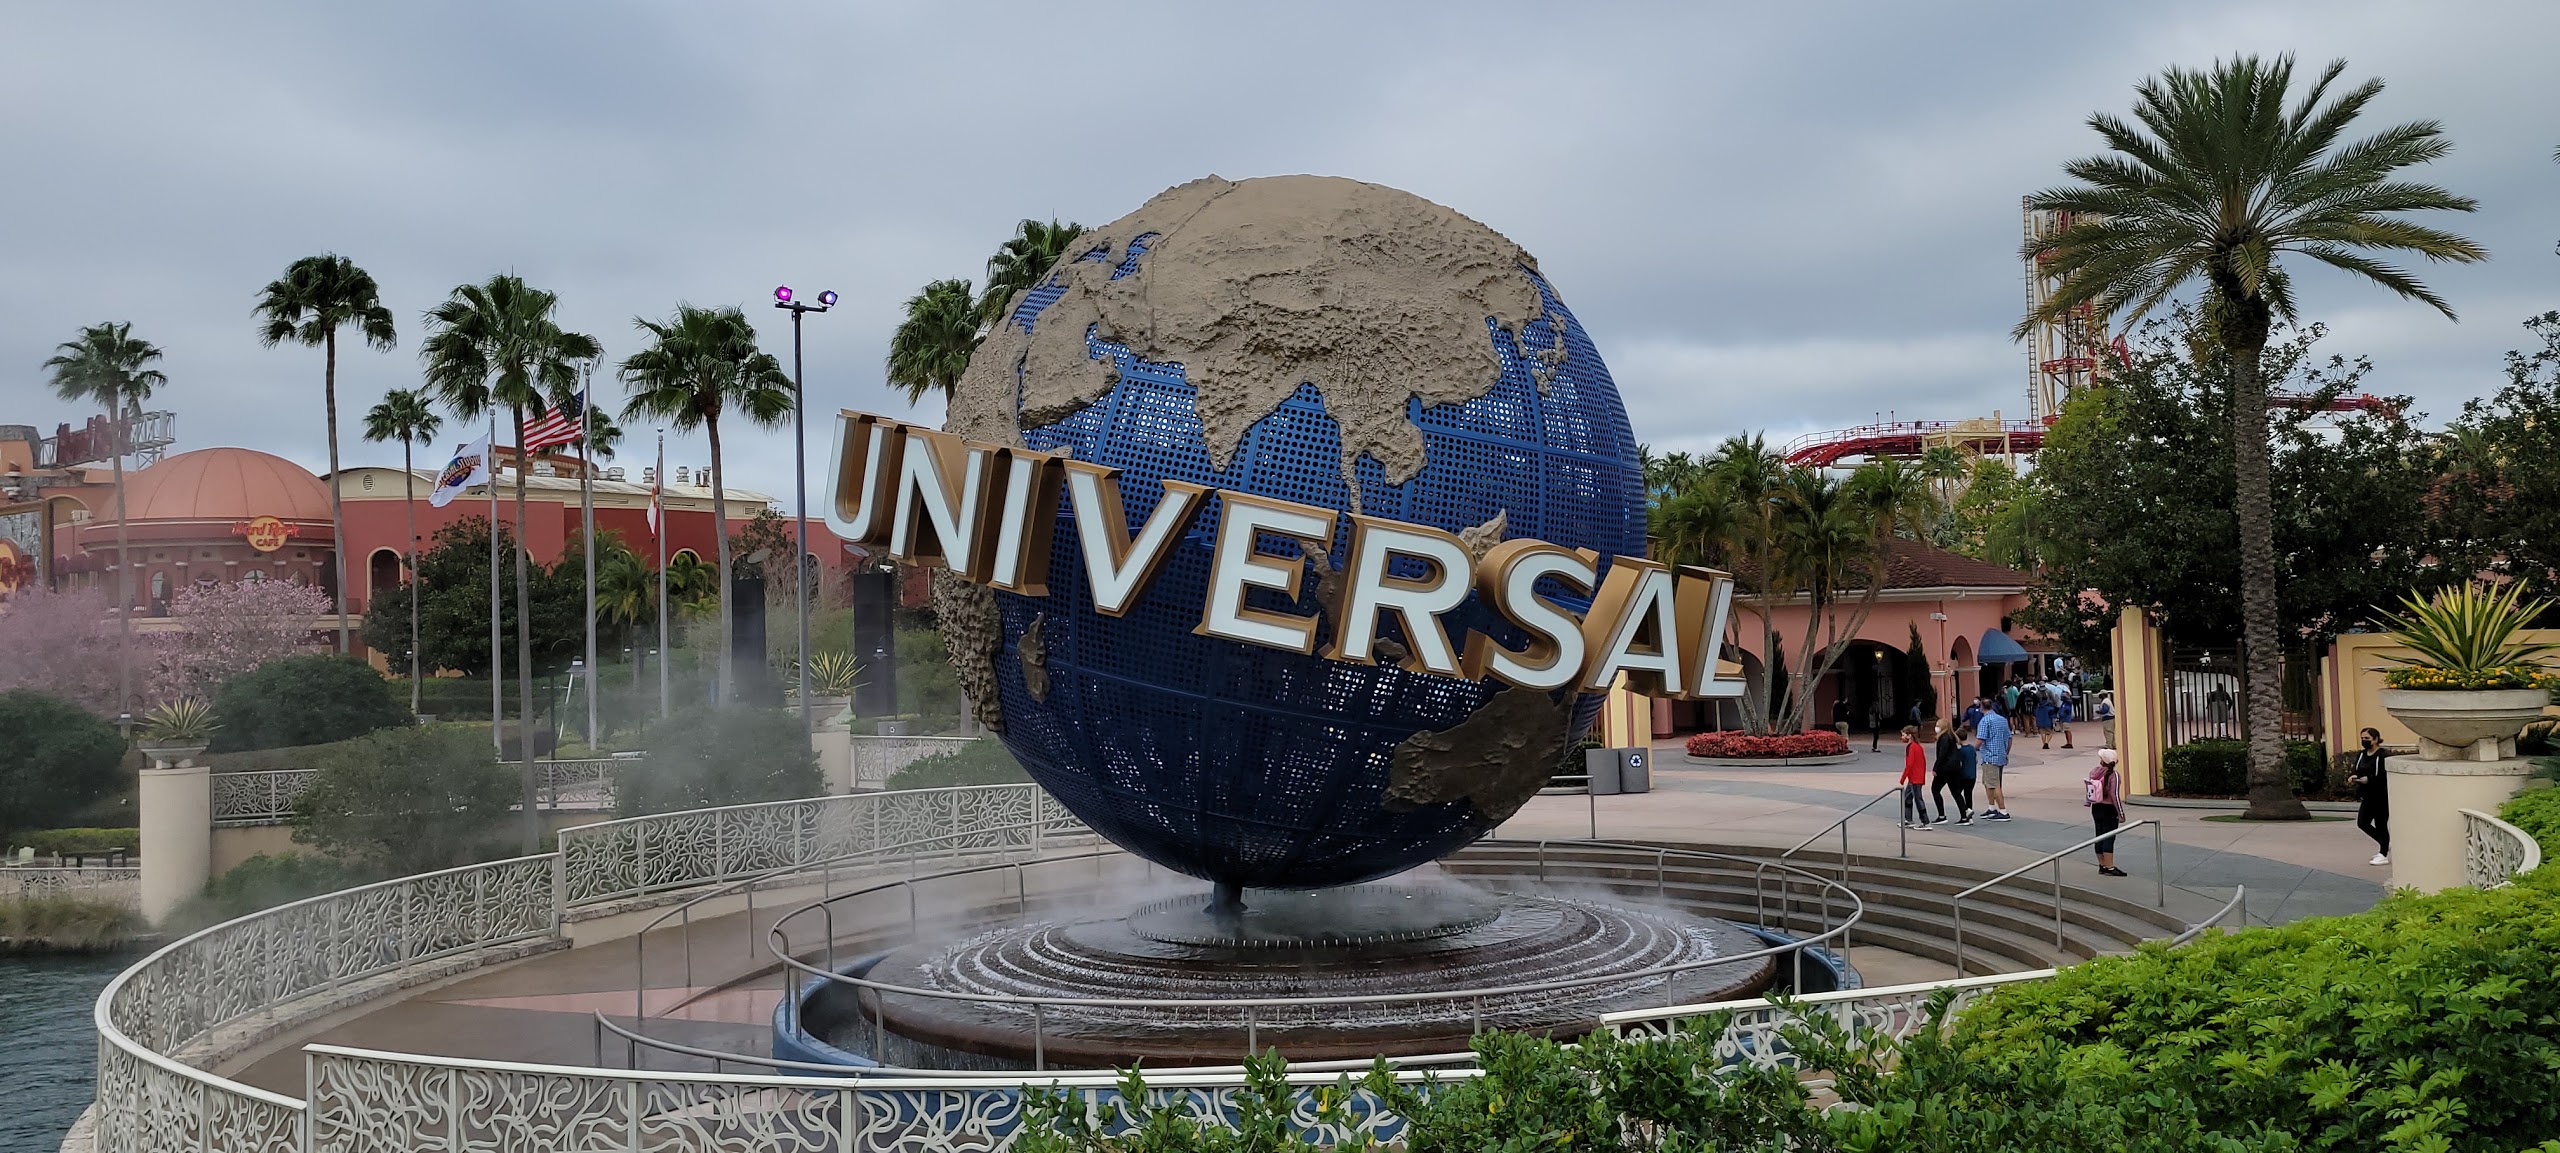 Orlando Theme Parks Accident & Injury Report released for first quarter of 2021